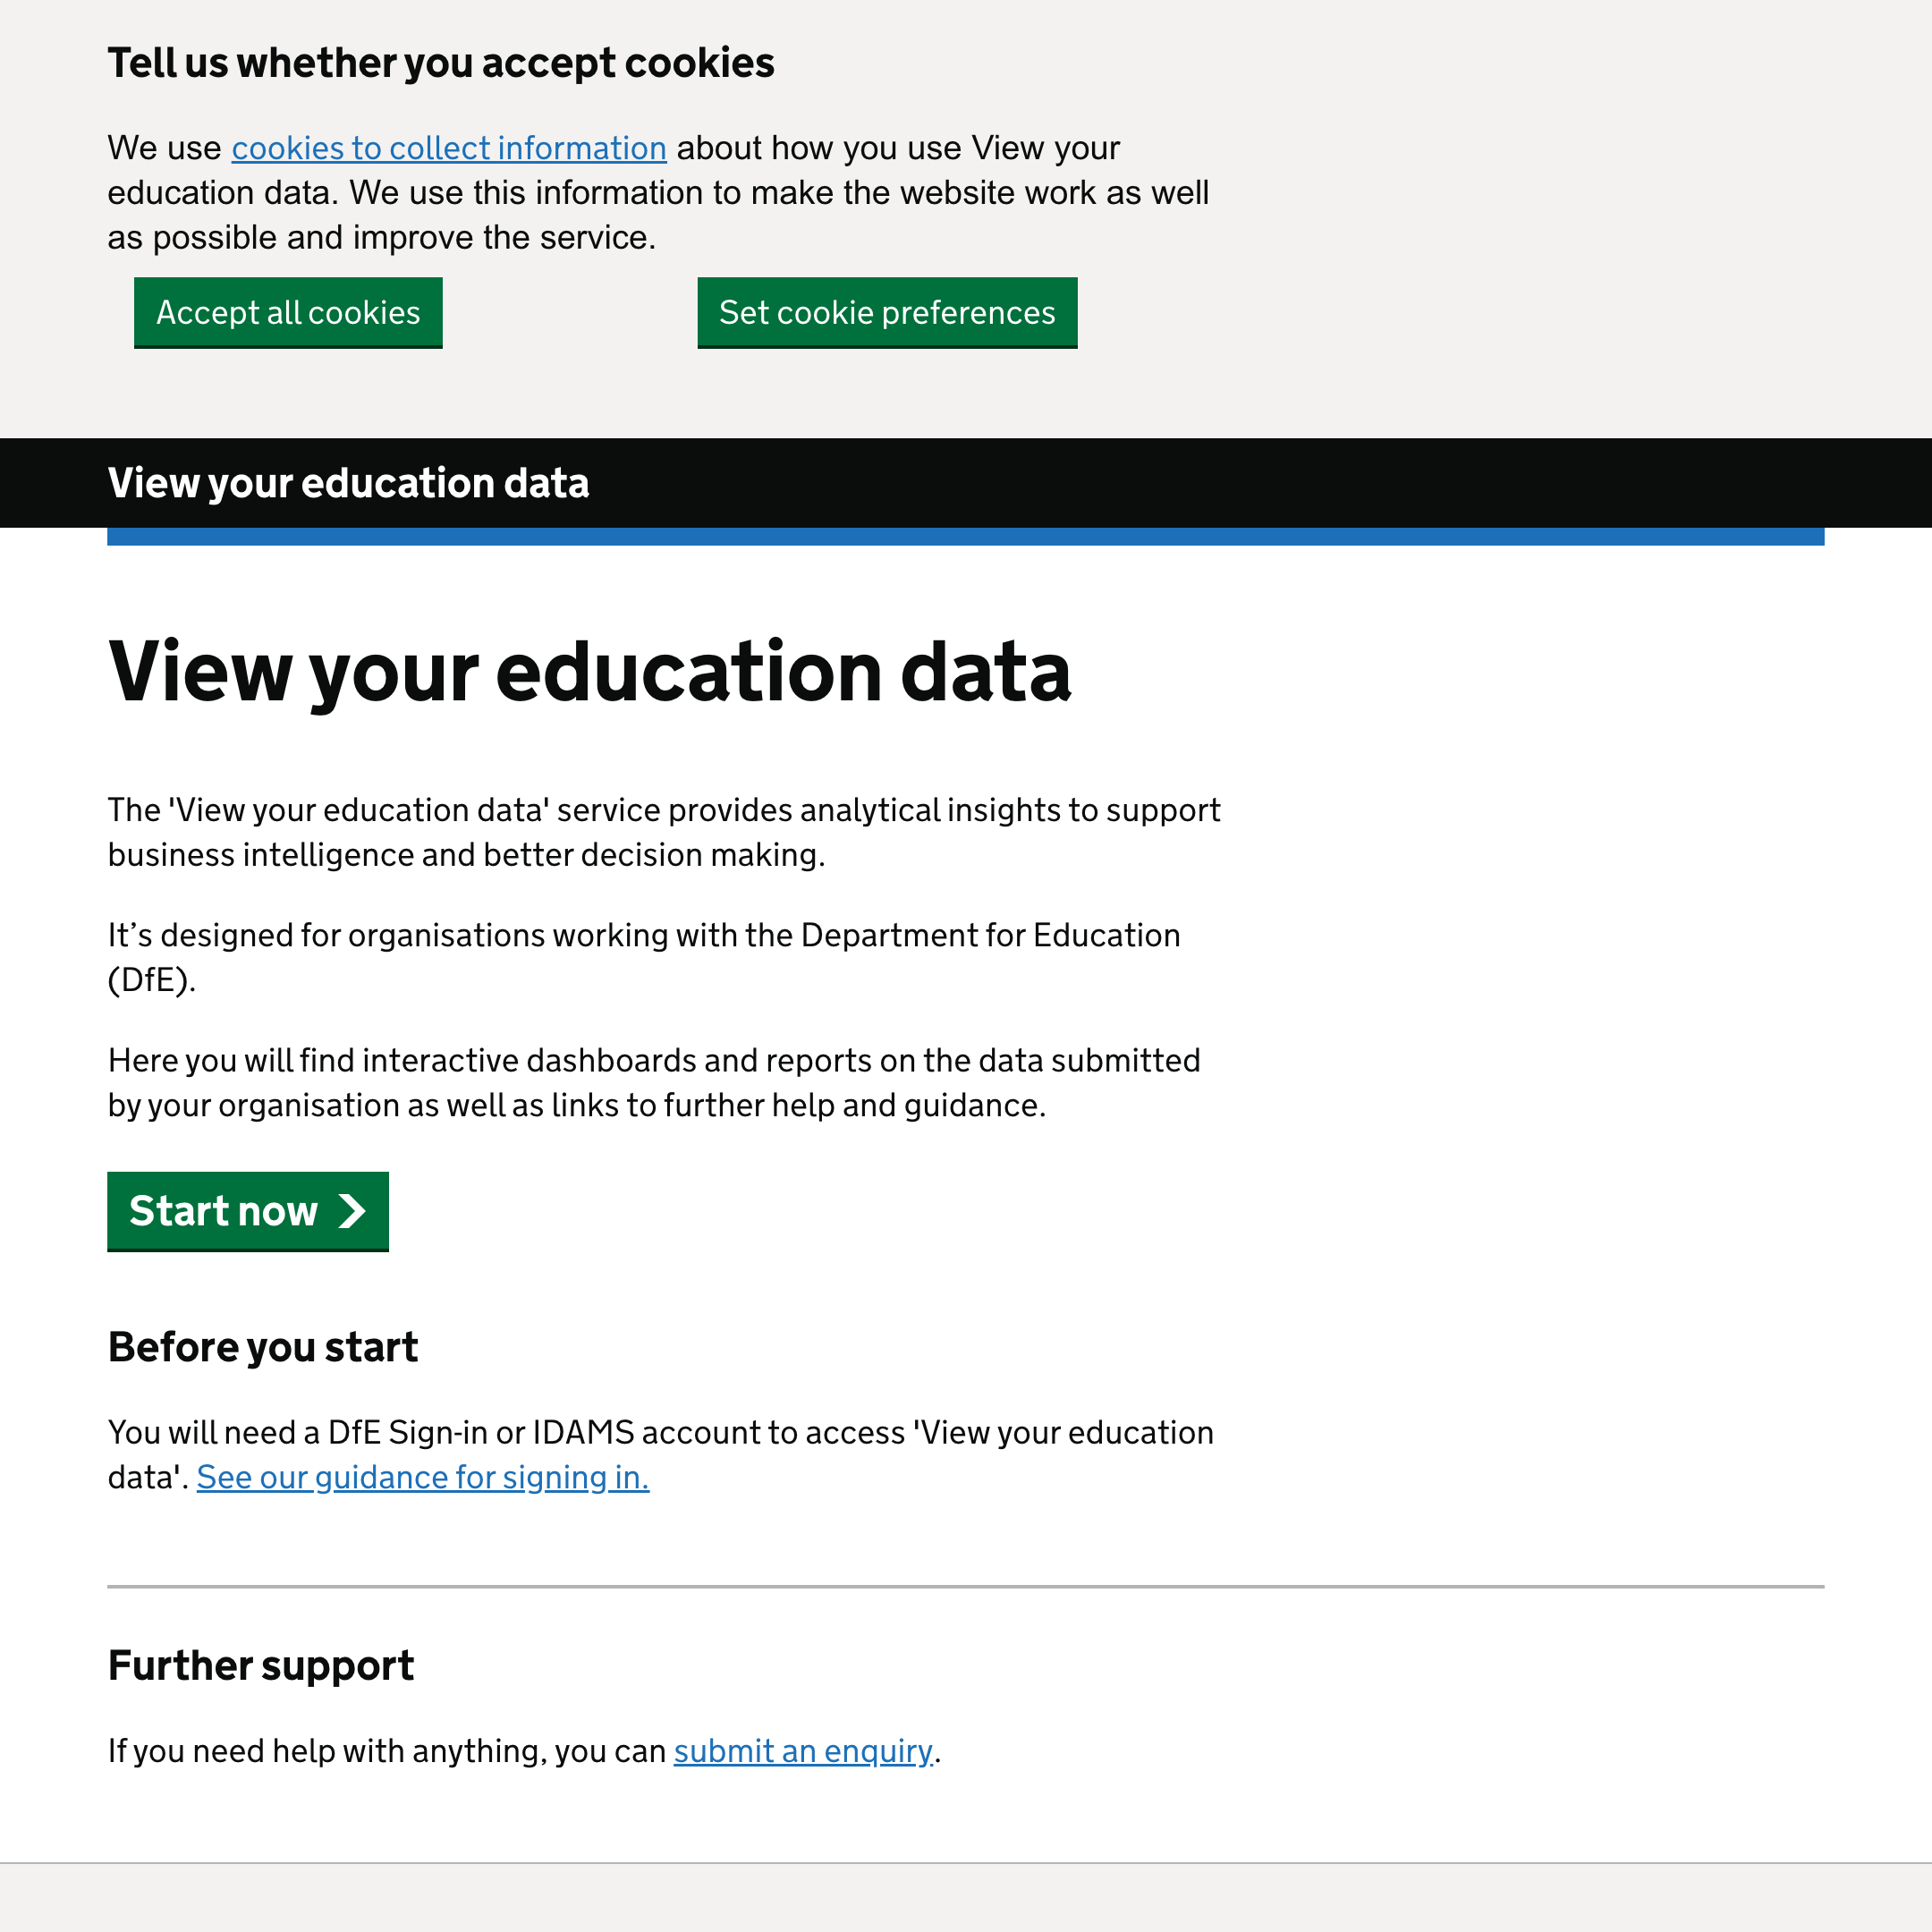 View your education data